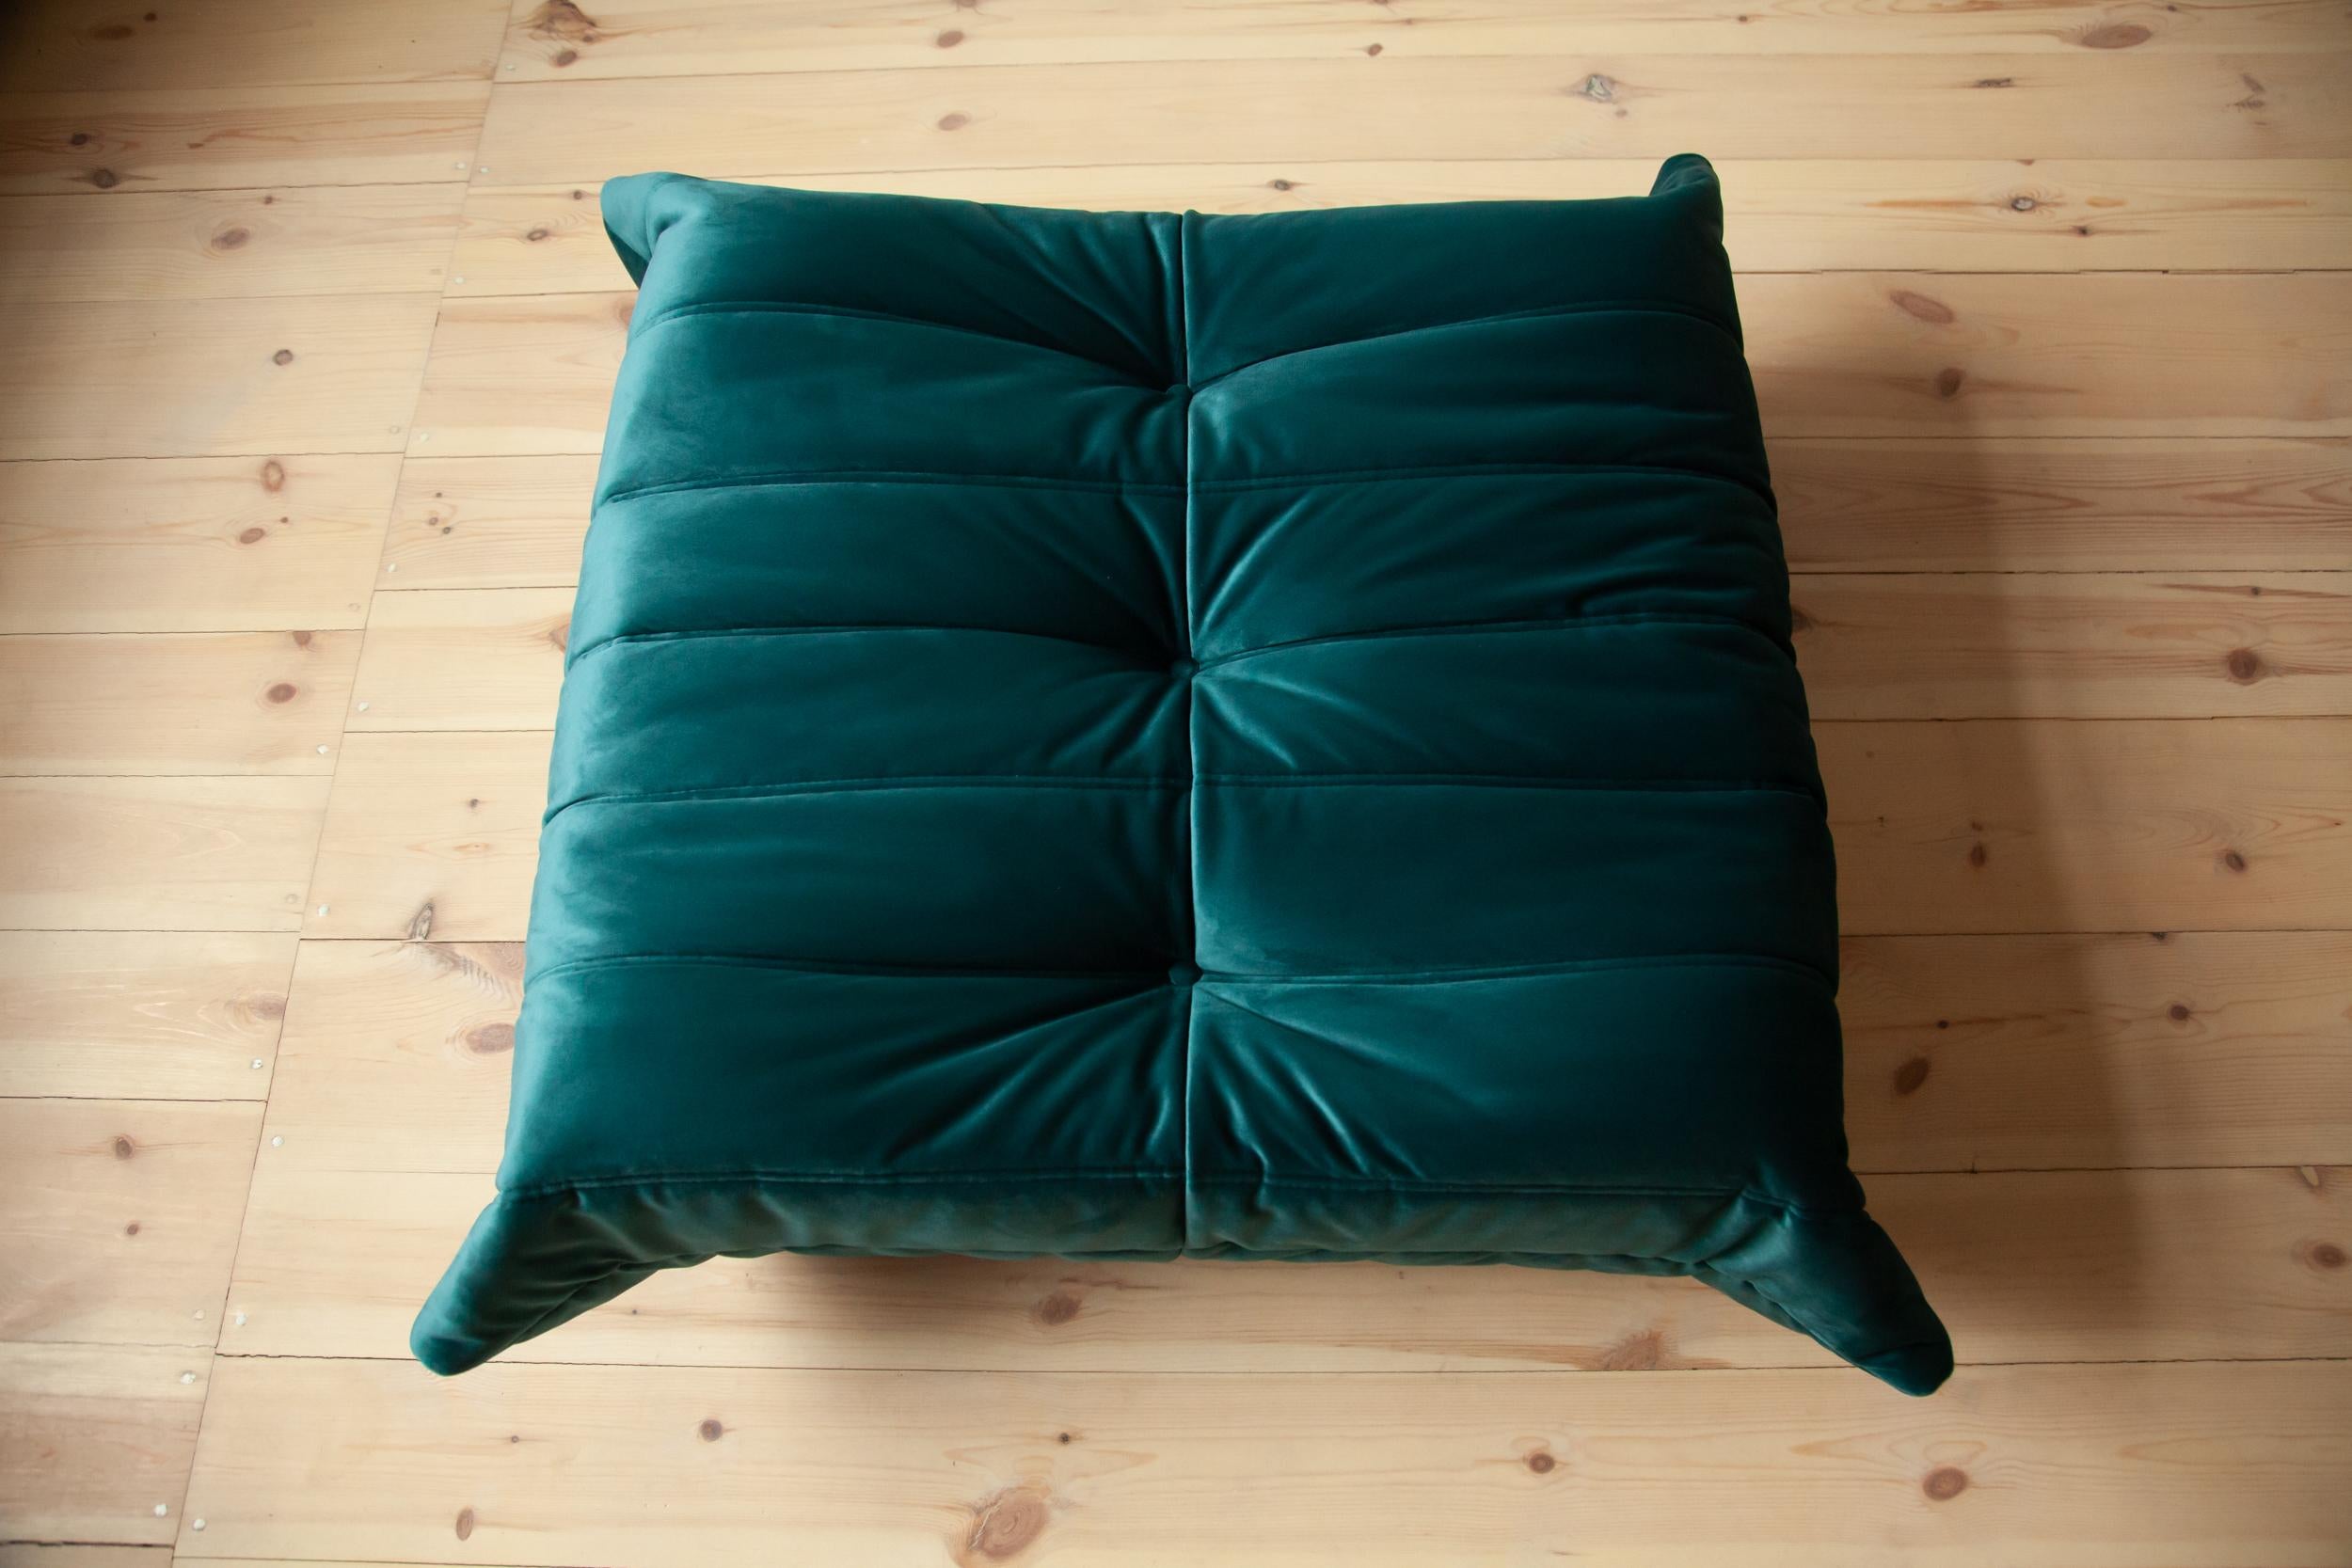 This Togo ottoman was designed by Michel Ducaroy in the 1973 and was manufactured by Ligne Roset in France. It has been reupholstered in new blue- green velvet (87 x 80 x 38 cm). It has the original Ligne Roset logo and genuine Ligne Roset bottom.